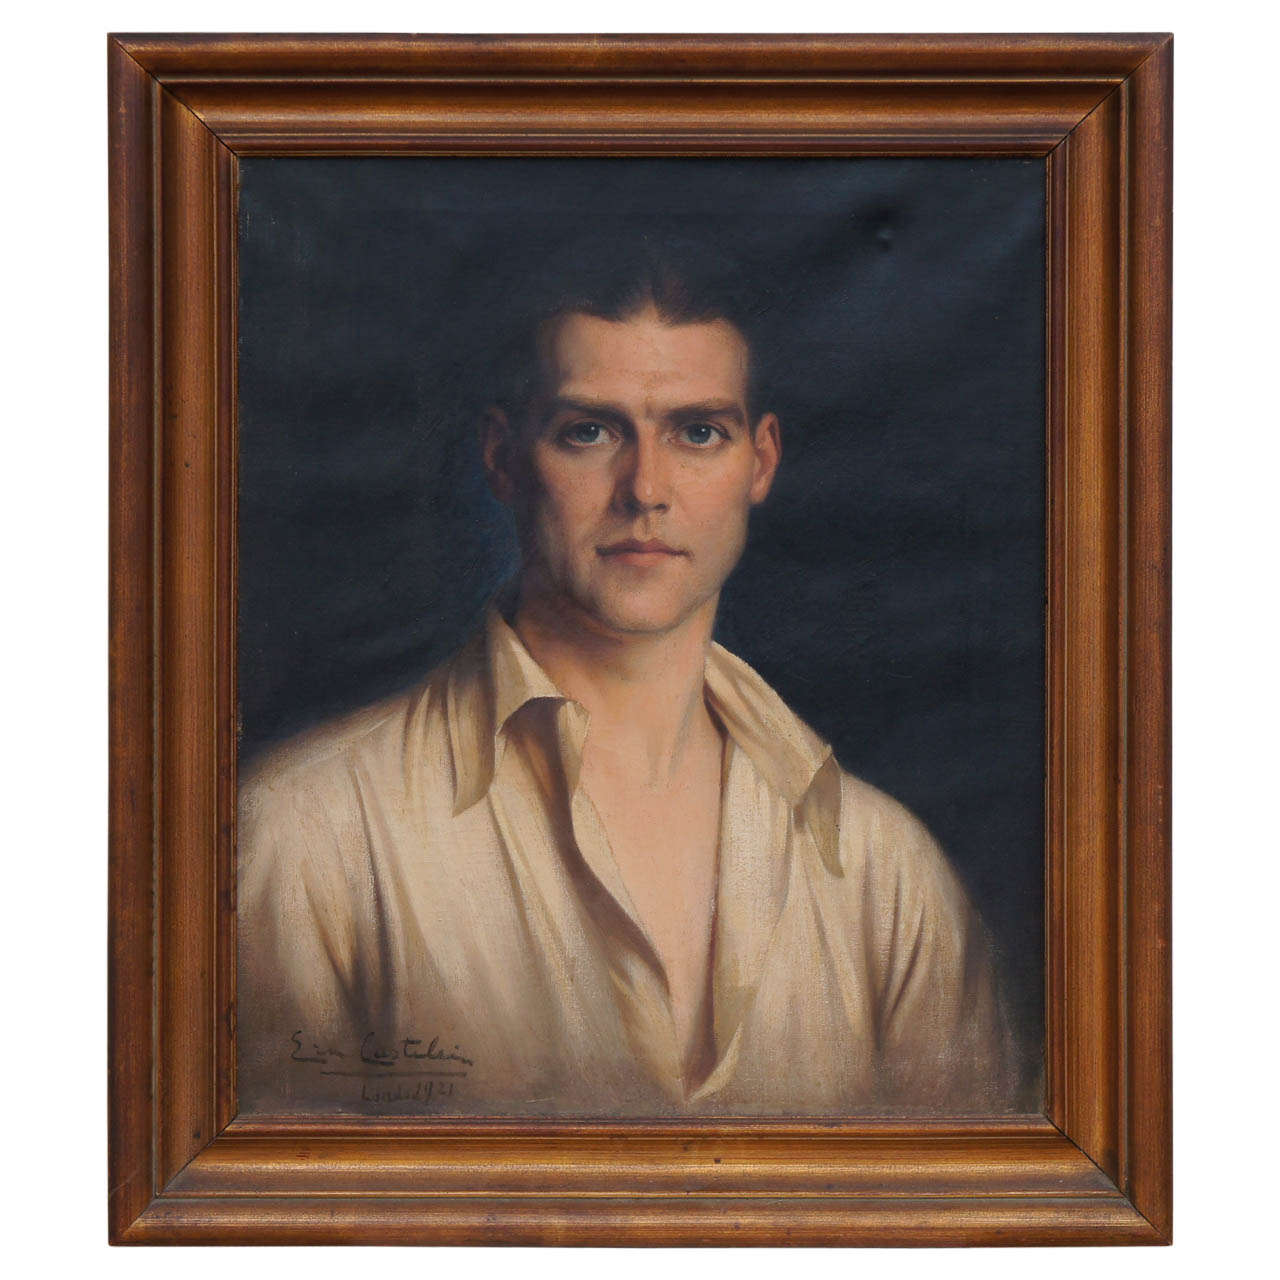 Society Portrait of Handsome Young Man by Ernest Castelein